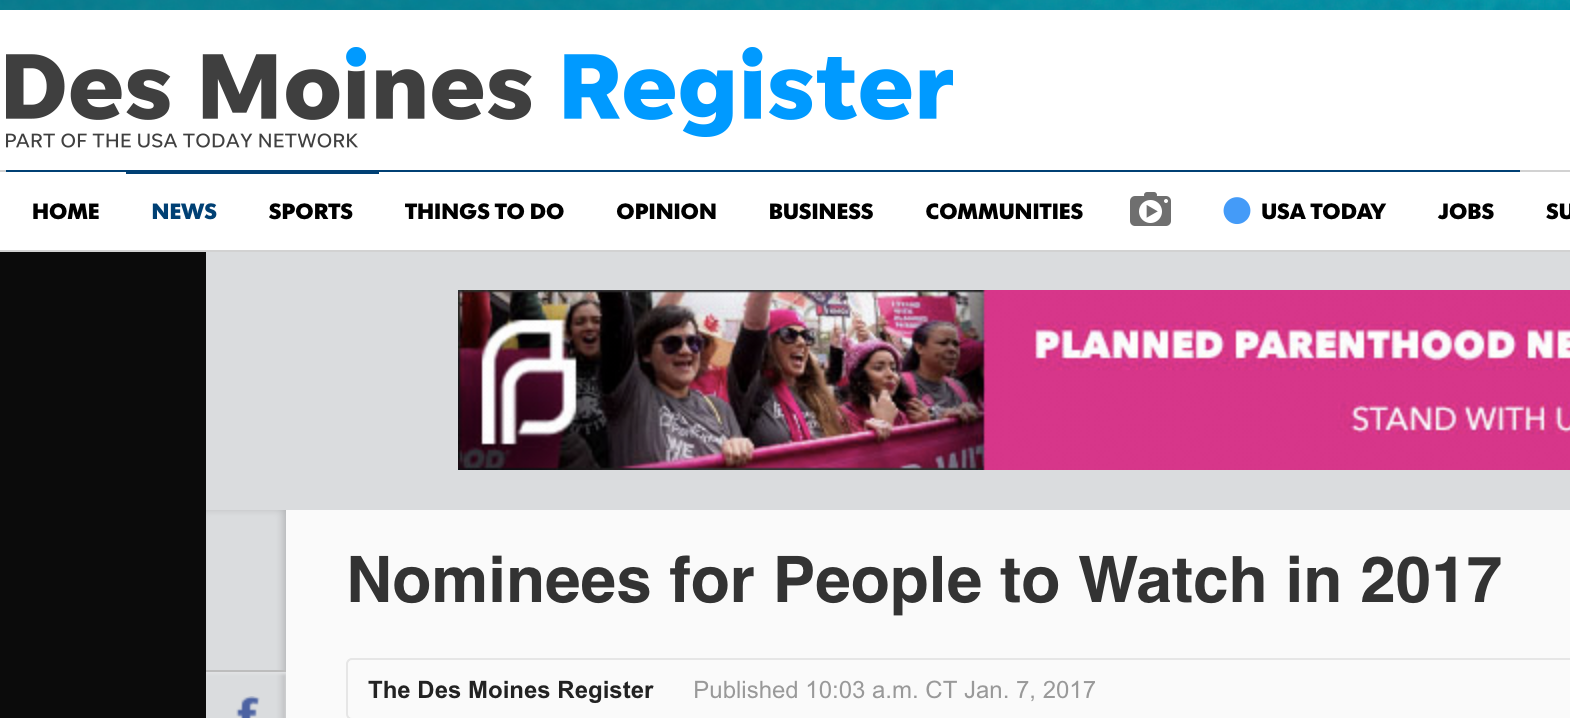 Des Moines Register's Nominees for People to Watch in 2017